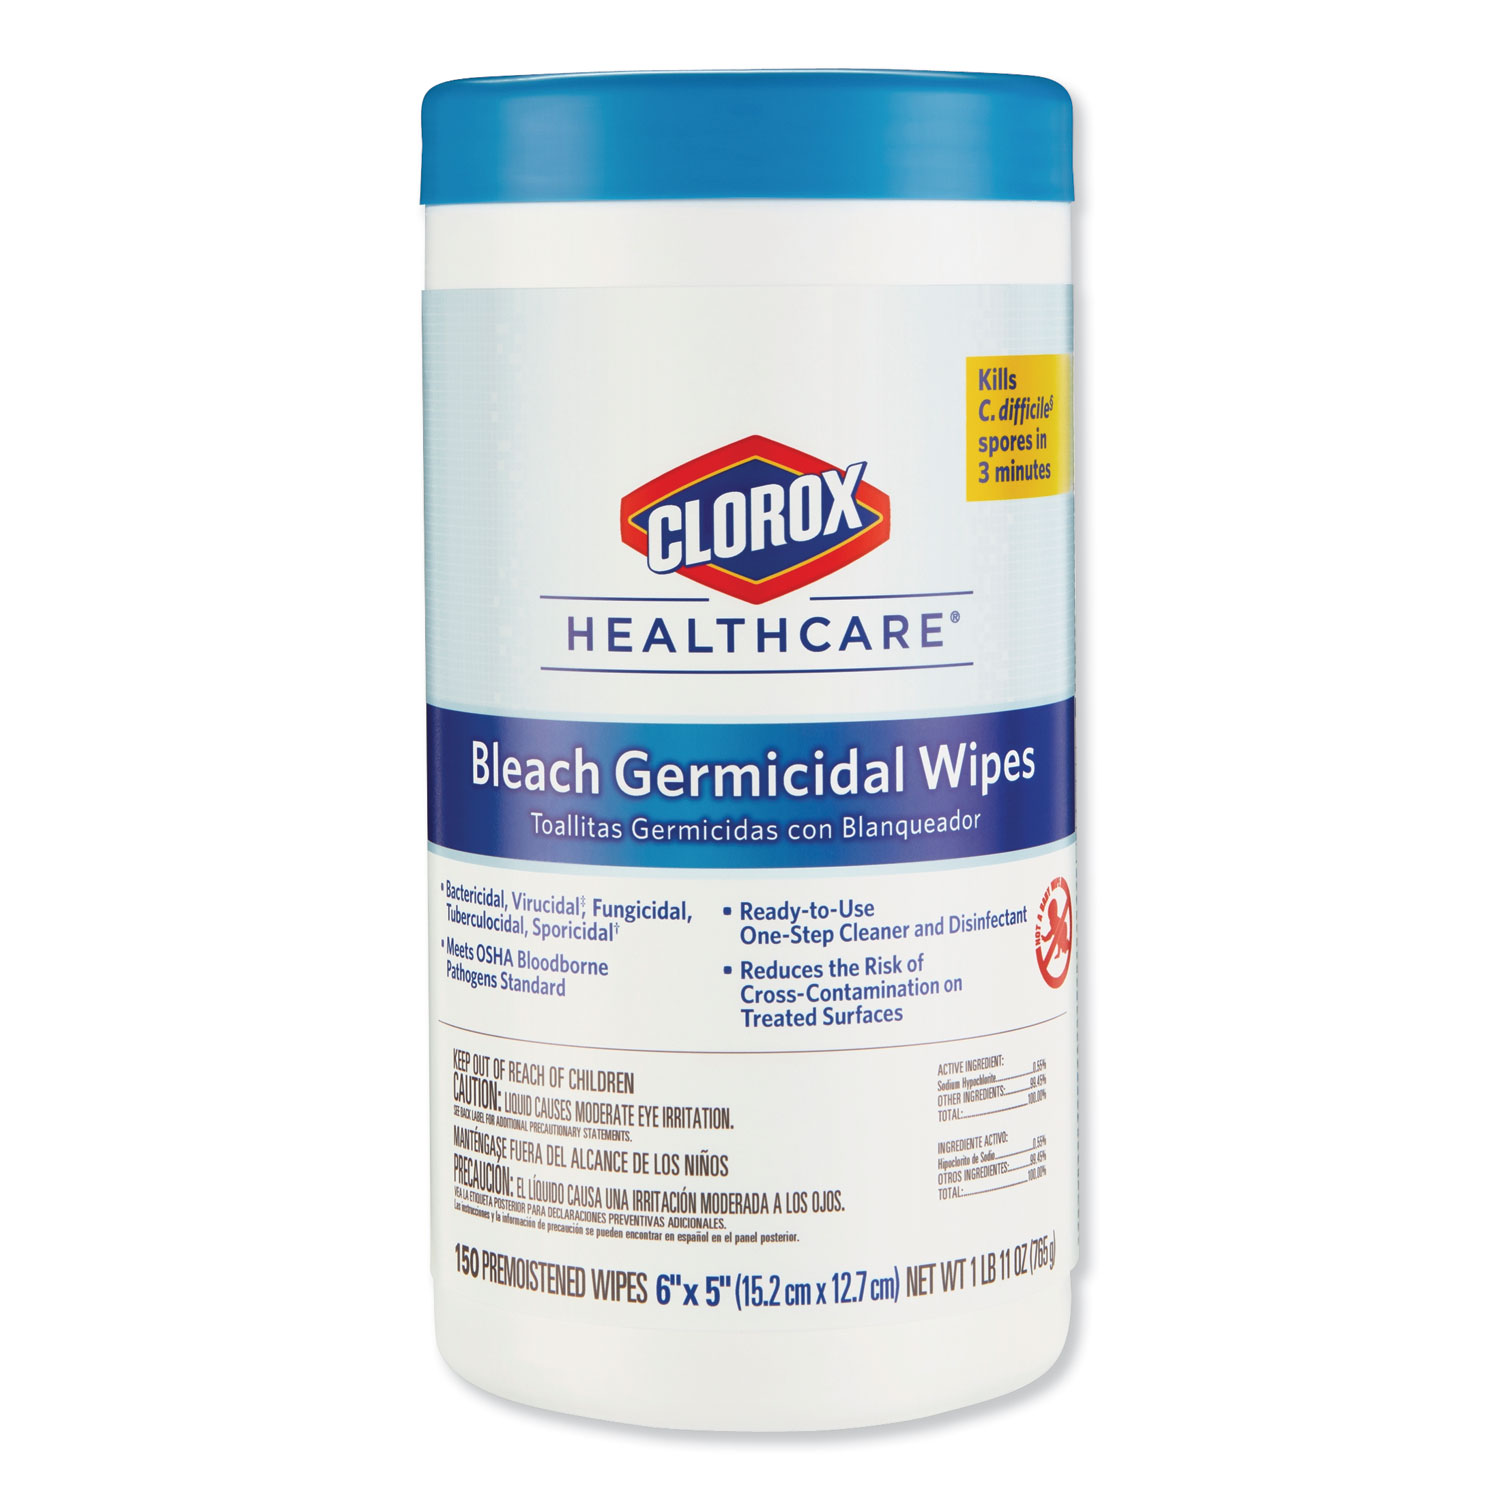  Clorox Healthcare 30577 Bleach Germicidal Wipes, 6 x 5, Unscented, 150/Canister (CLO30577) 